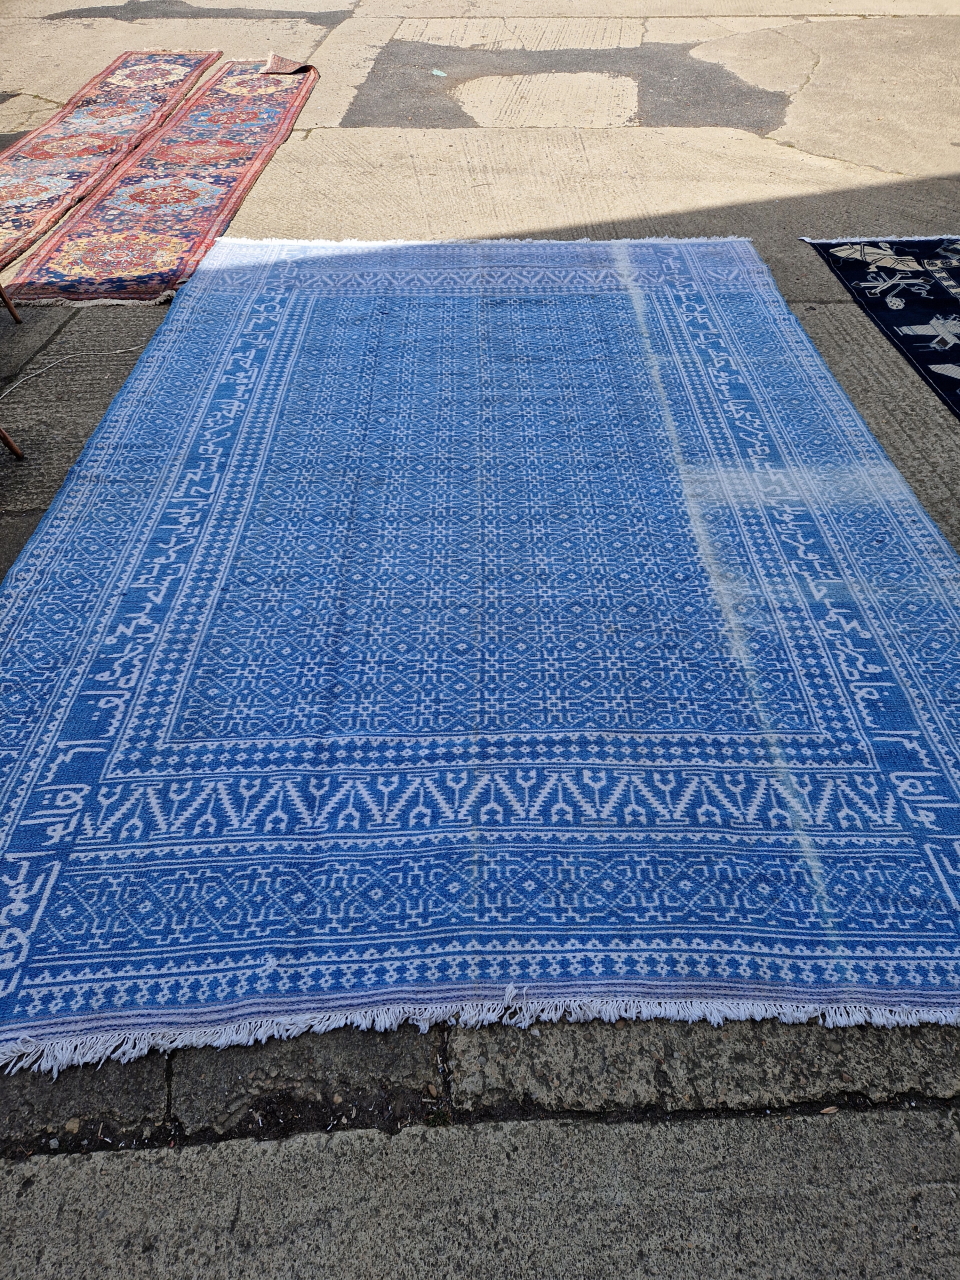 AN UNUSUAL PERSIAN FLAT WOVEN CARPET WITH INSCRIPTIONS 425 x 292 cm